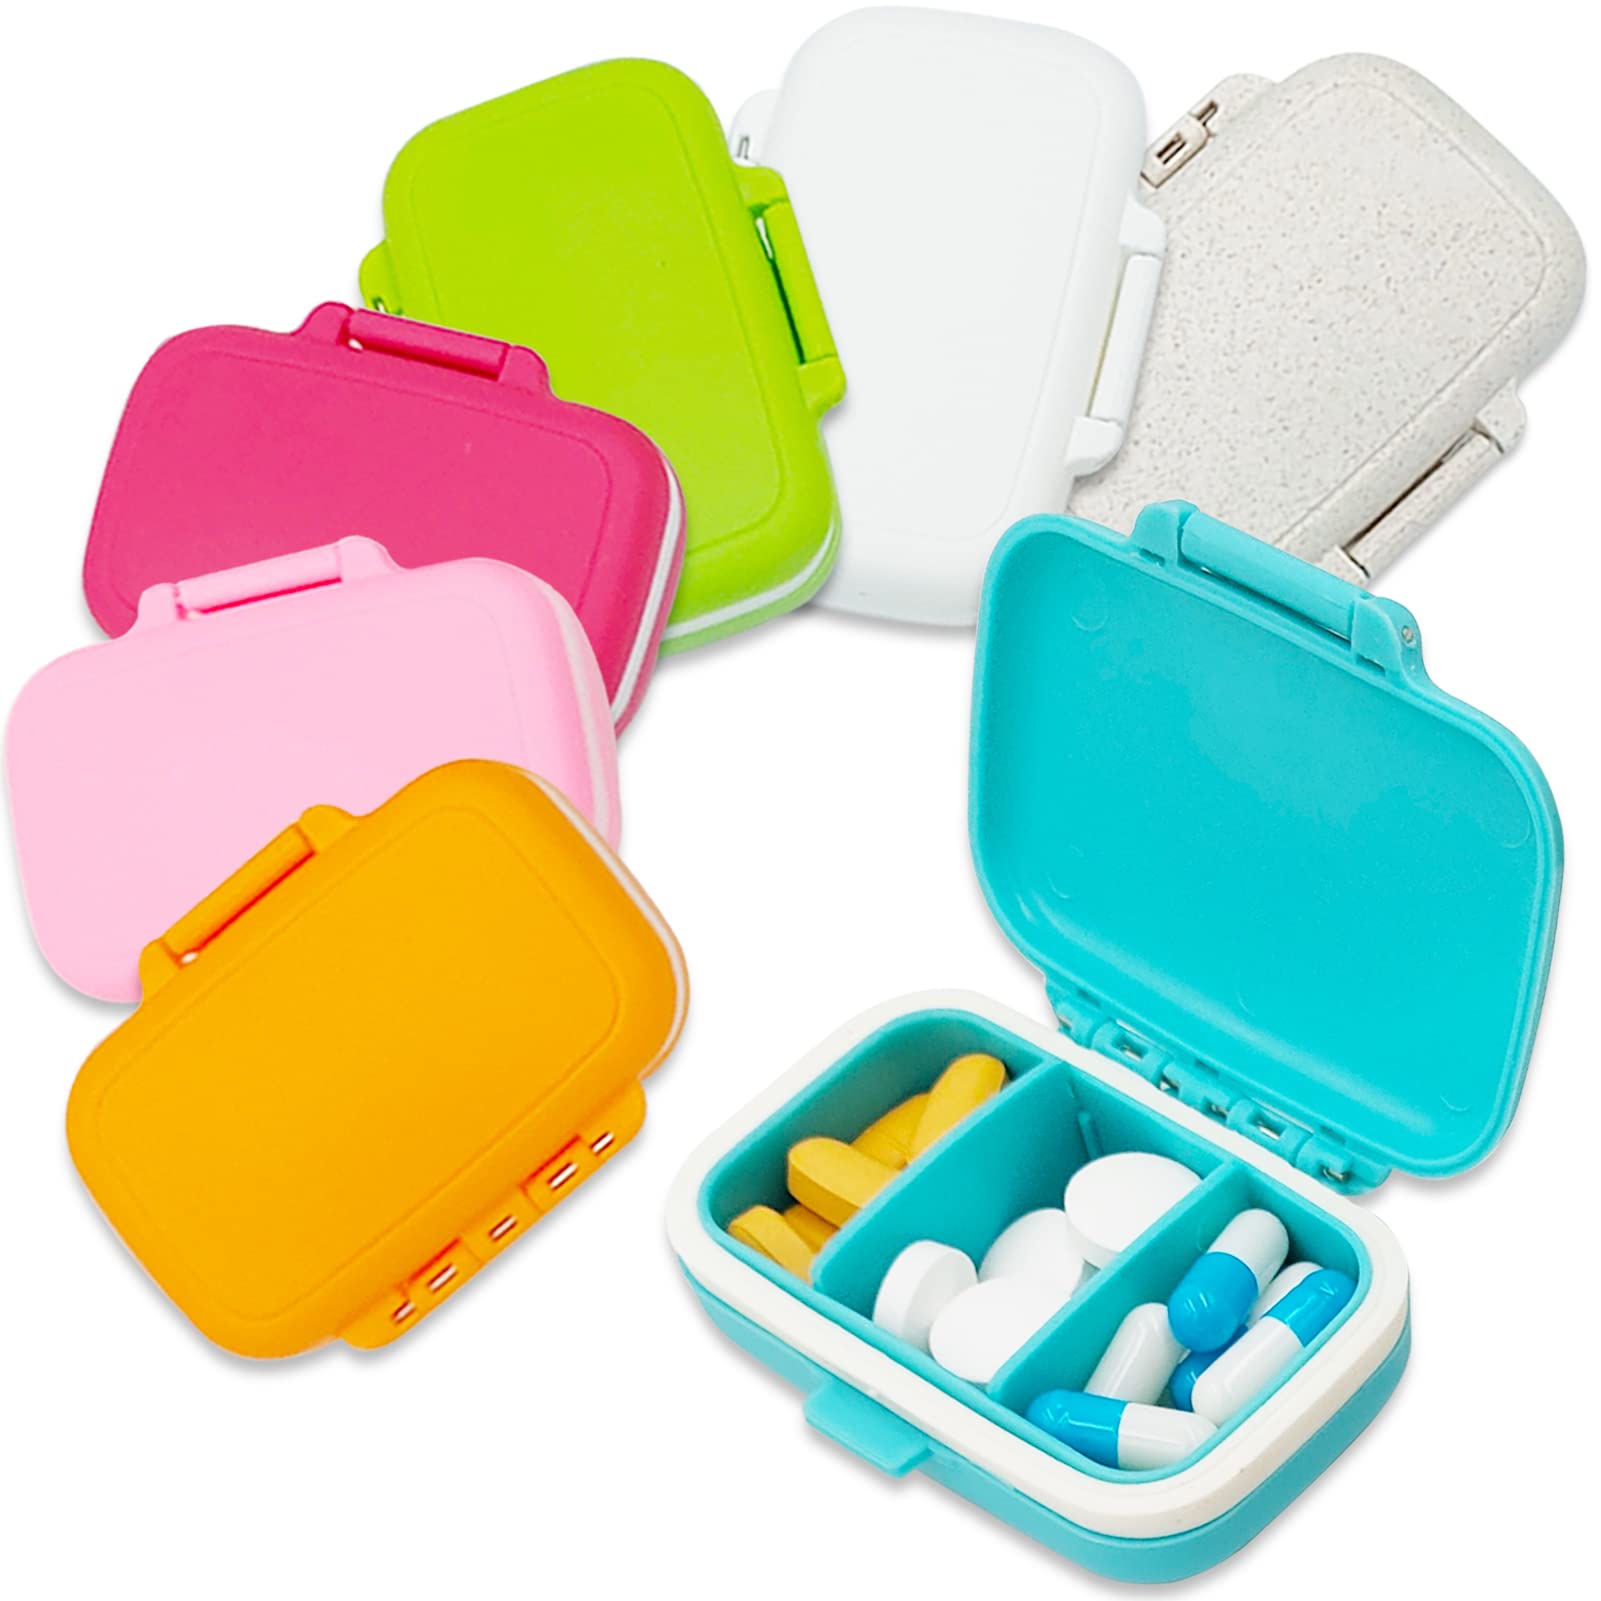 Pill Organizer with Case for Travel